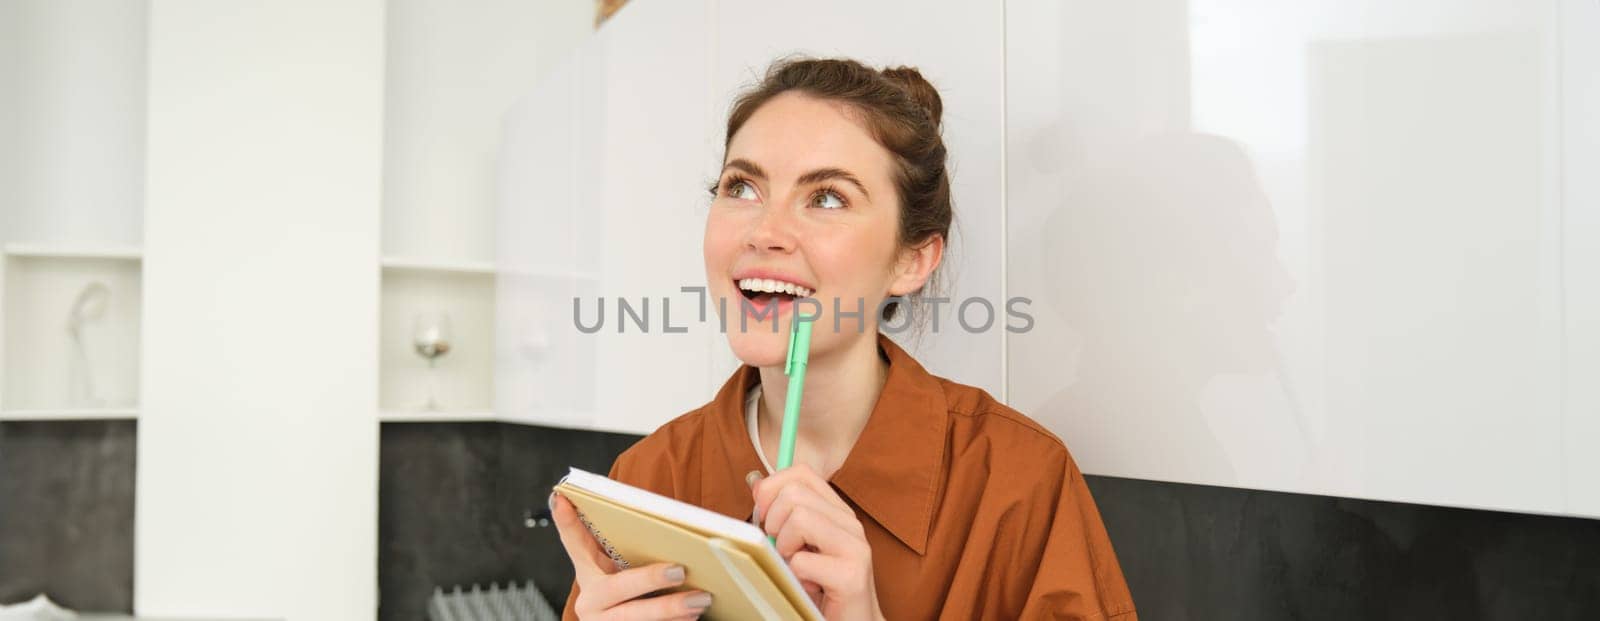 Portrait of young smiling woman with creative thoughts, looking up with inspired face, holding pen and notebook, writing down her ideas.